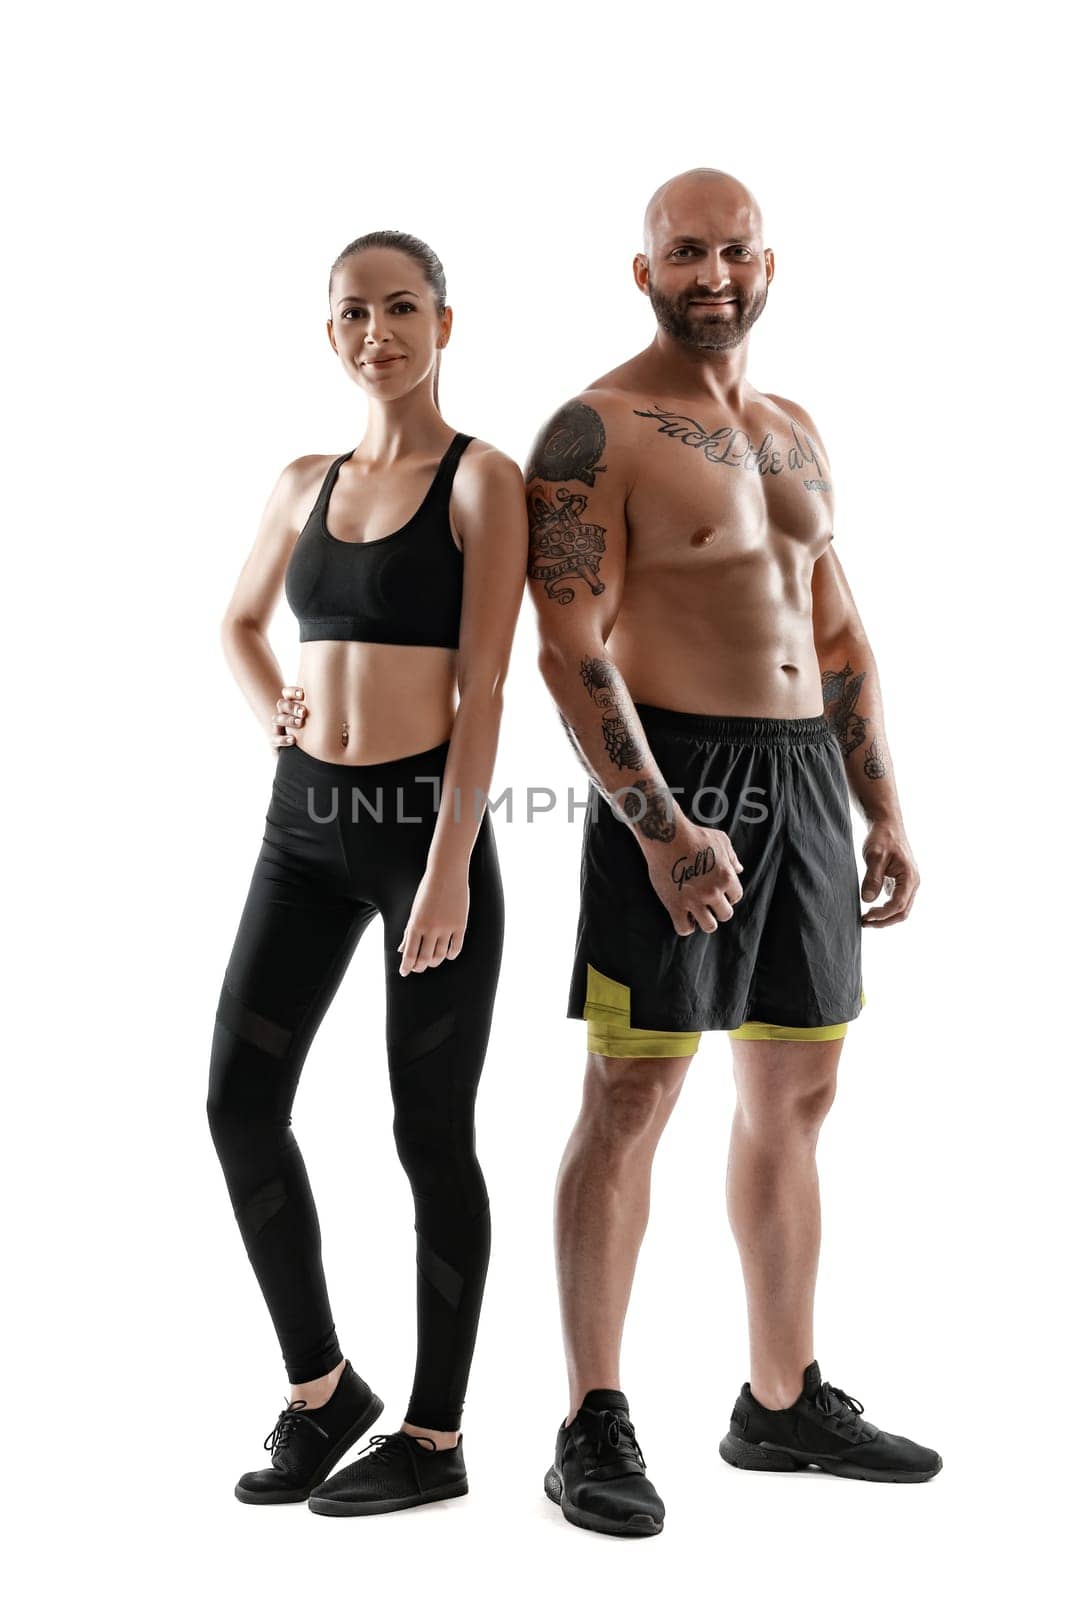 Athletic bald, tattooed male in black shorts and sneakers with beautiful brunette female in leggings and top are posing isolated on white background and looking at the camera. Fitness couple, chic muscular bodies, gym concept. The love story.